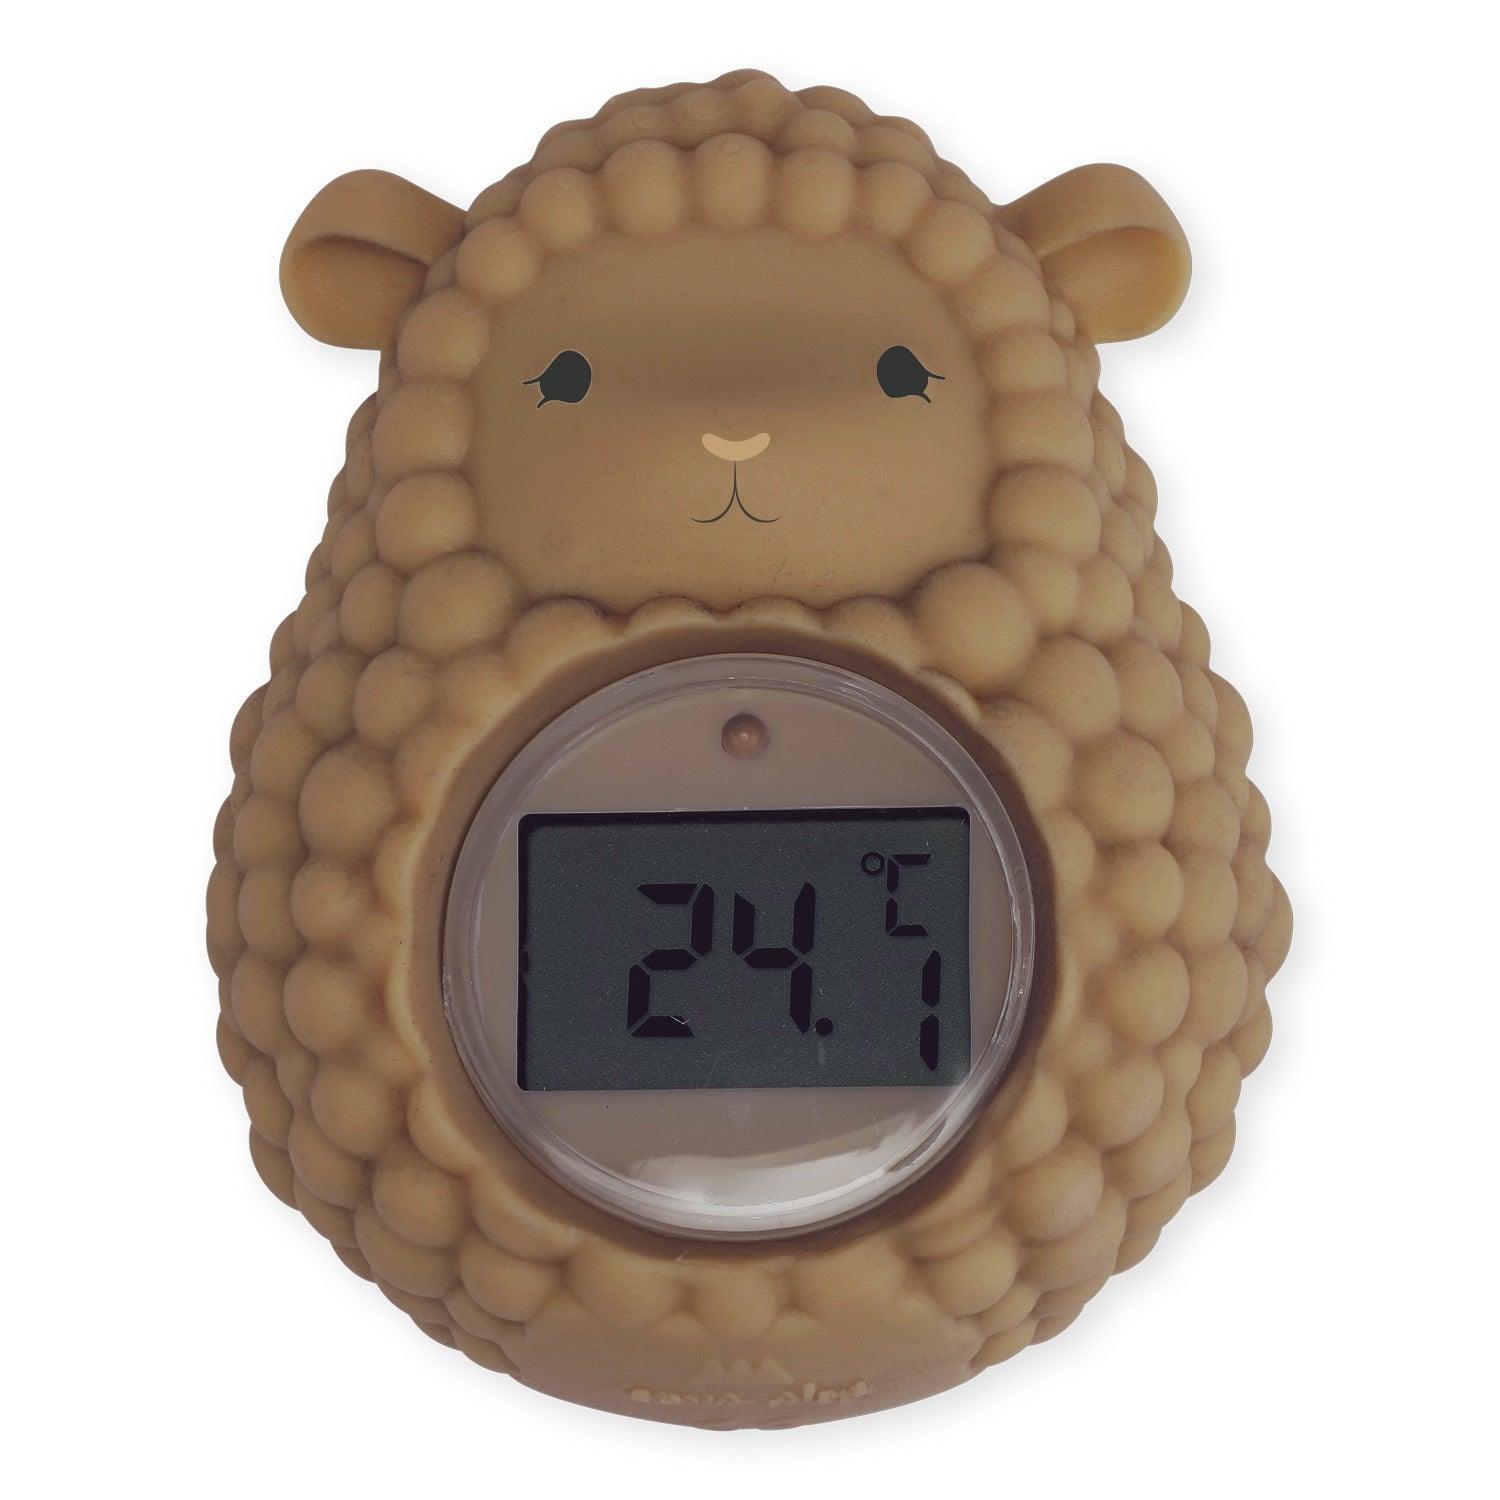 Badethermometer 'Sheep Almond' - The Little One • Family.Concept.Store. 